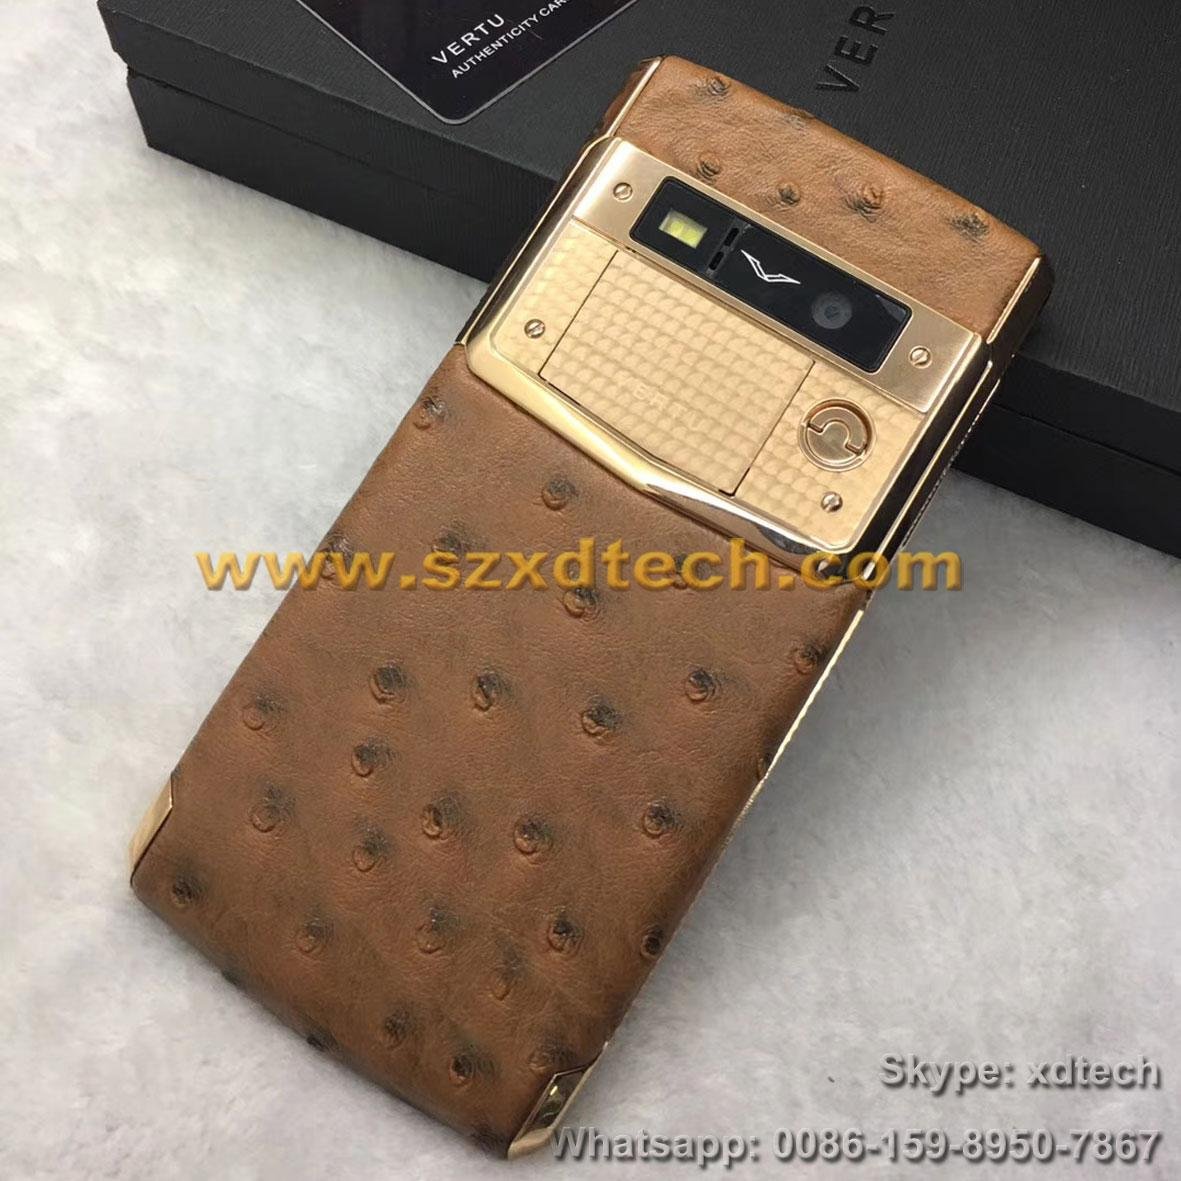 Copy Vertu Signature Touch, Bentley Sexy Ostrich Leather Octacore 3